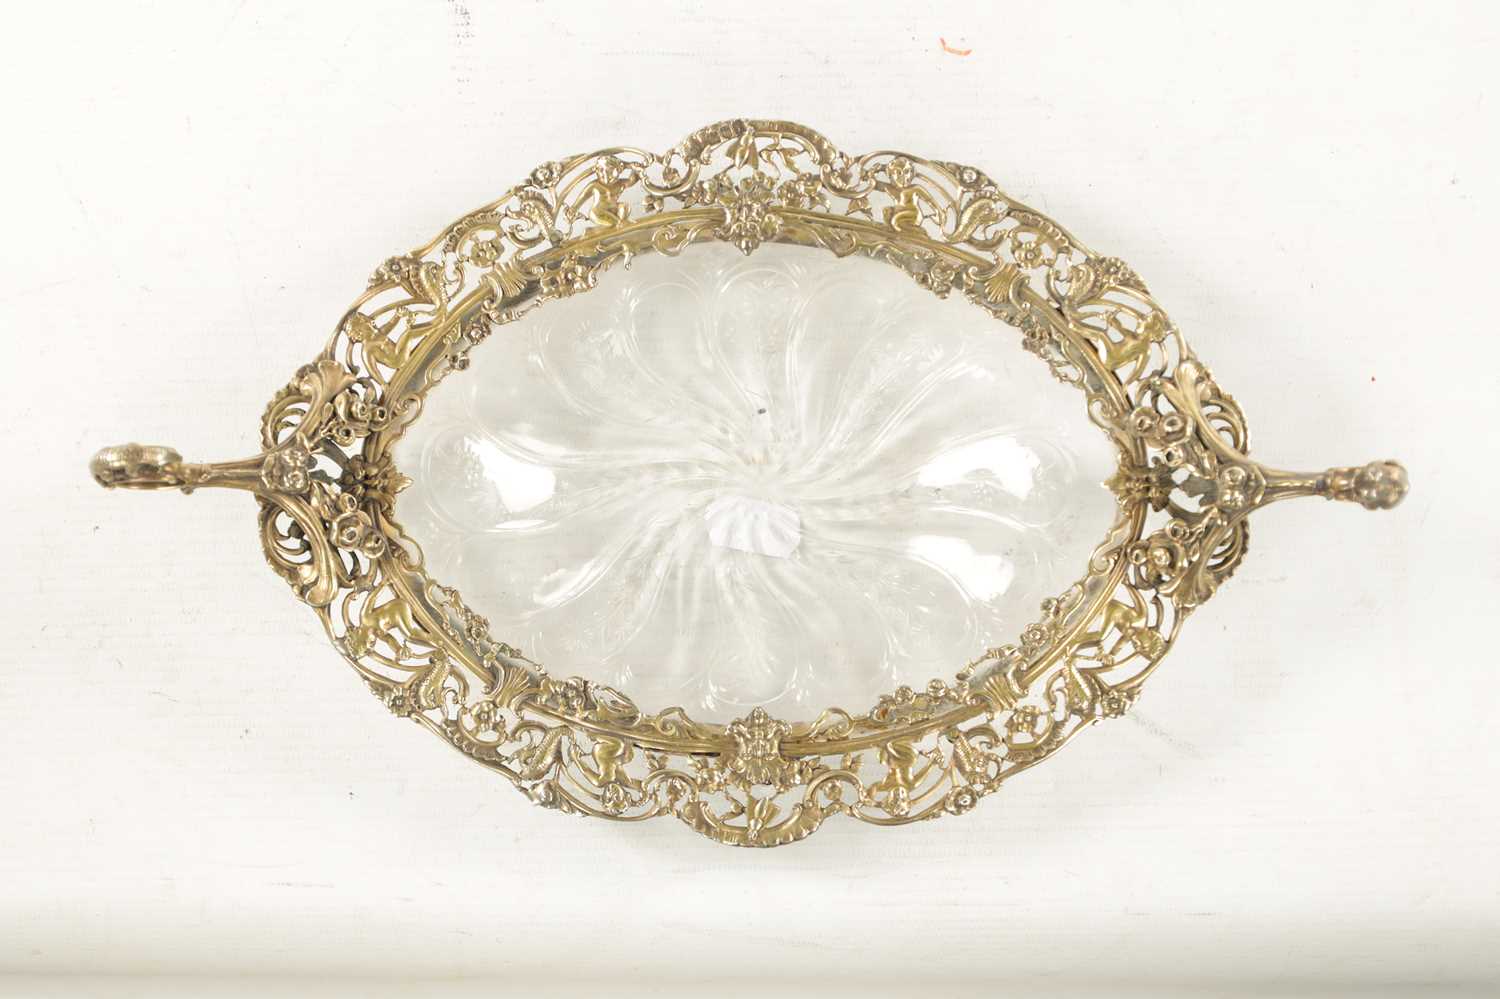 AN EARLY 20TH CENTURY GILT CAST SILVER TWO-HANDLED SHALLOW DISH - Image 5 of 8